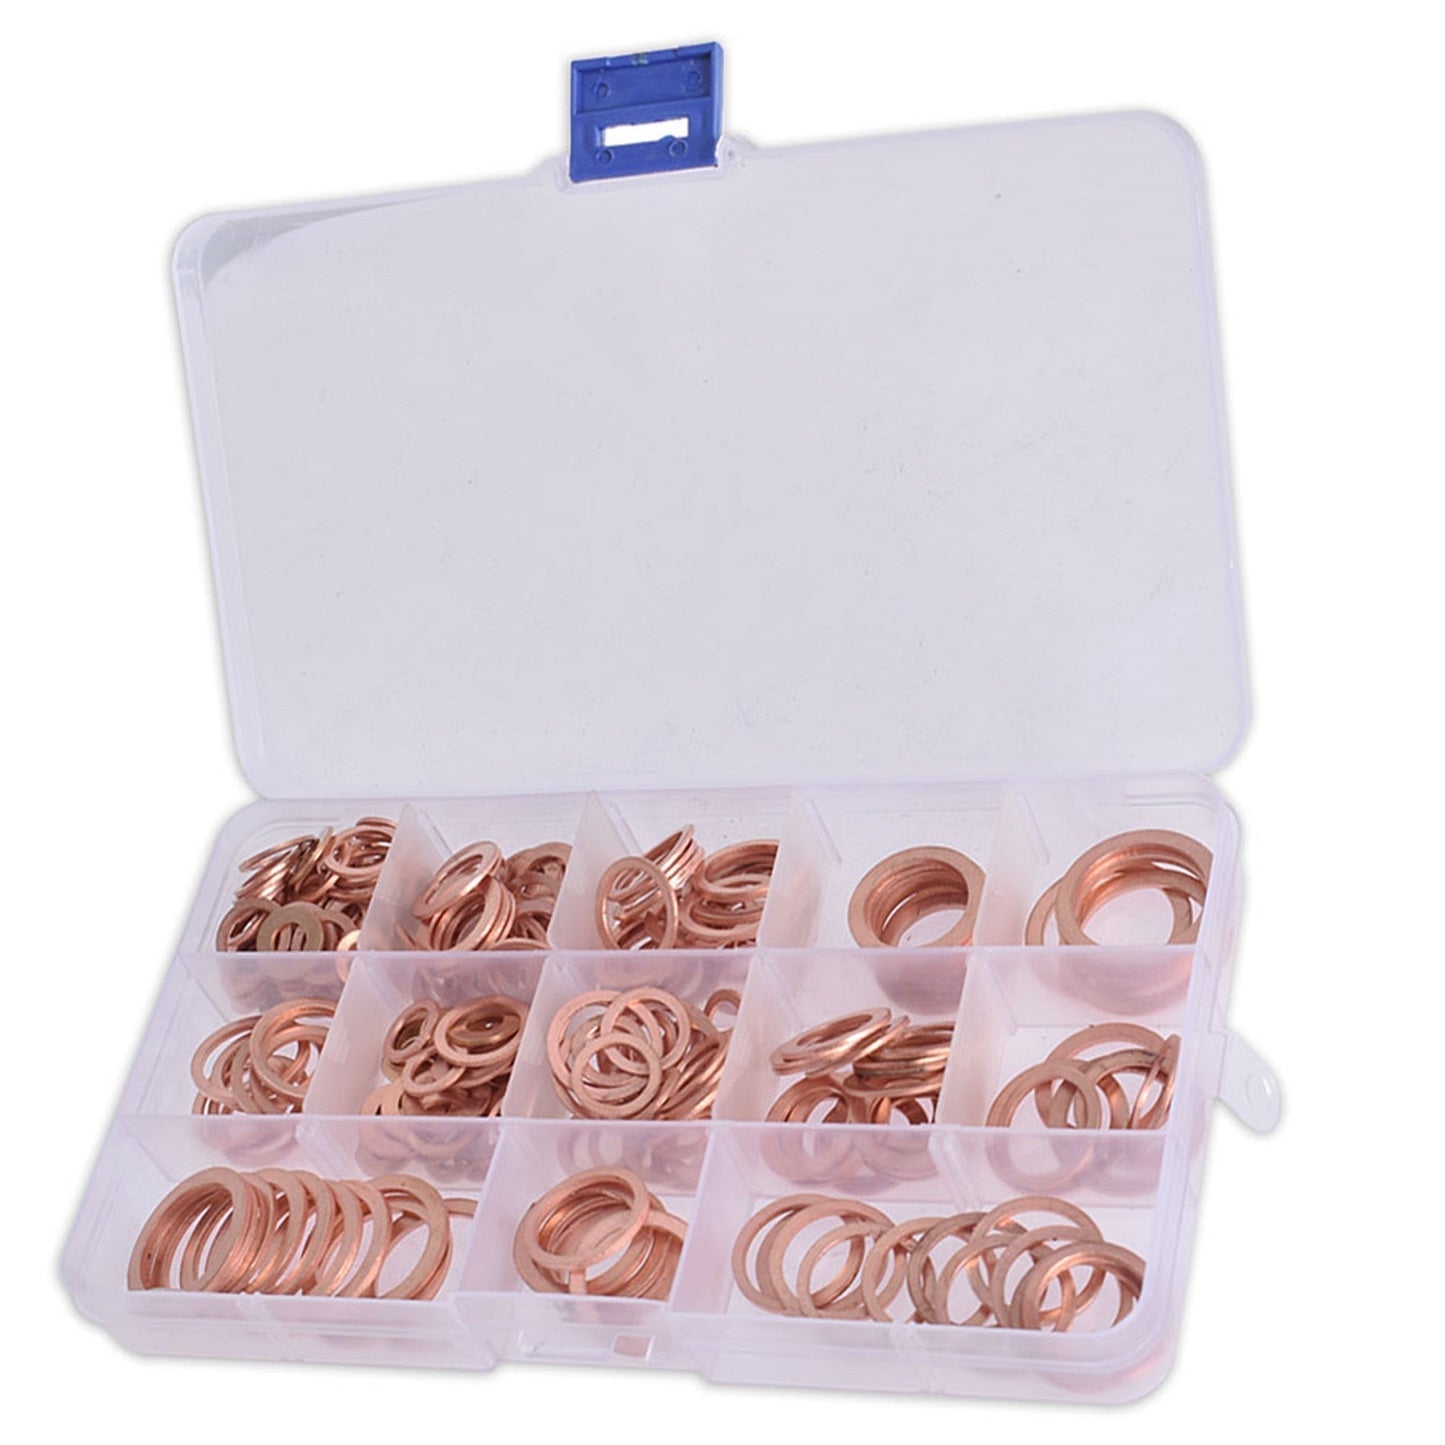 findmall 280Pcs Solid Copper Crush Washers Seal Sealing Flat O-Ring Gaskets Assorted Kit FINDMALLPARTS